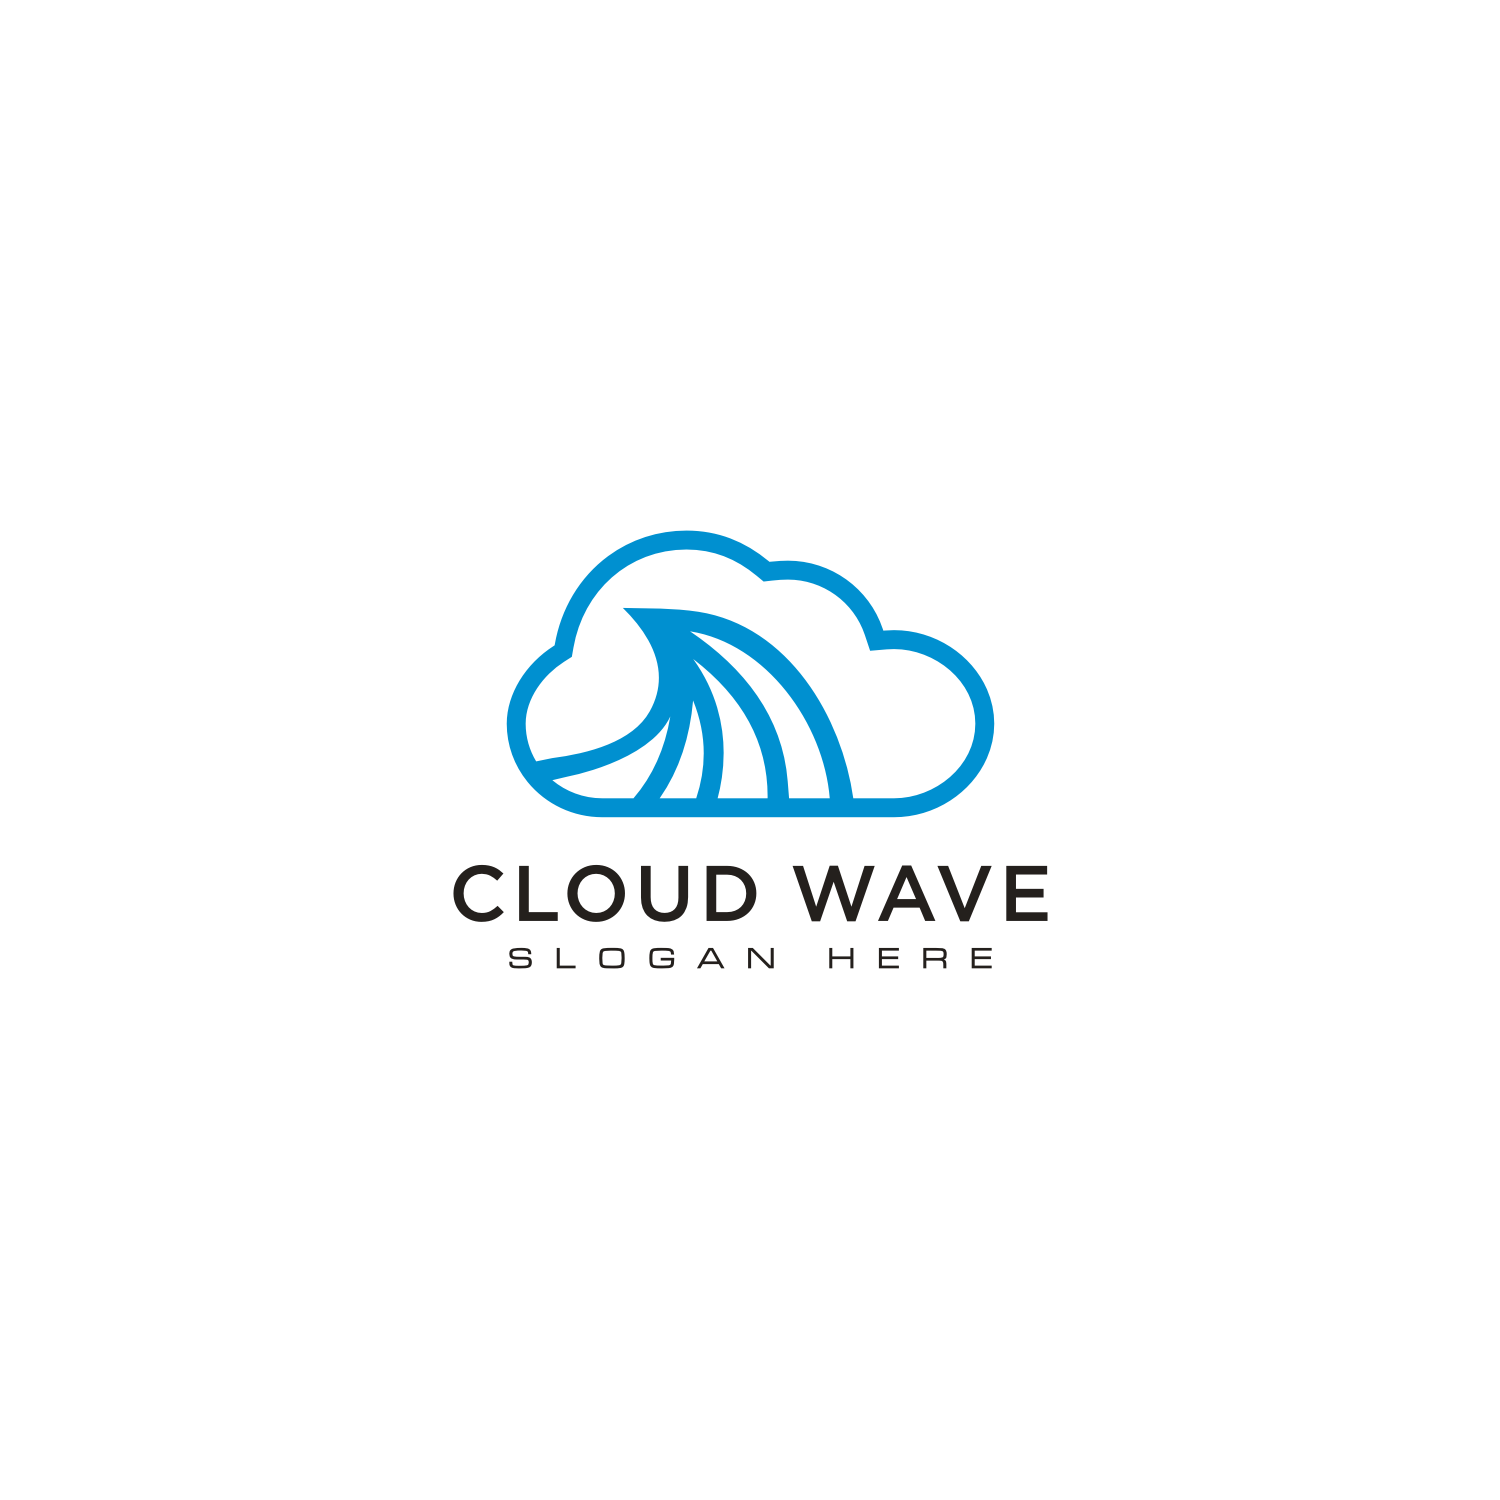 Cloud Wave Logo Vector Line Style cover image.